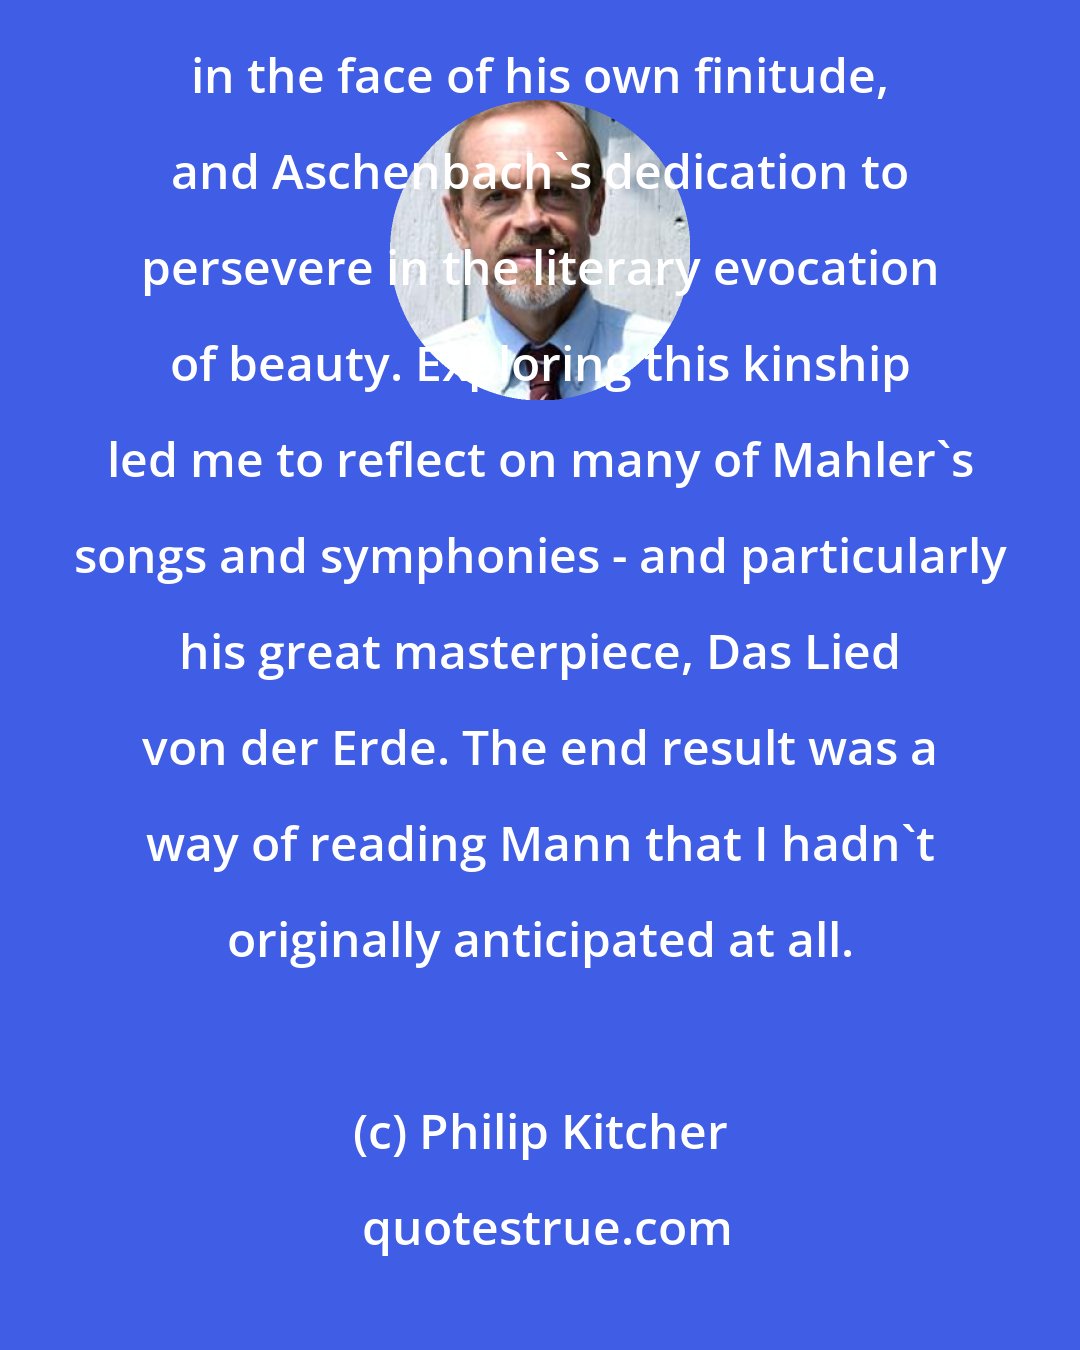 Philip Kitcher: I found a deep kinship between Mahler's recurrent attempts to confront all sides of life and to affirm himself in the face of his own finitude, and Aschenbach's dedication to persevere in the literary evocation of beauty. Exploring this kinship led me to reflect on many of Mahler's songs and symphonies - and particularly his great masterpiece, Das Lied von der Erde. The end result was a way of reading Mann that I hadn't originally anticipated at all.